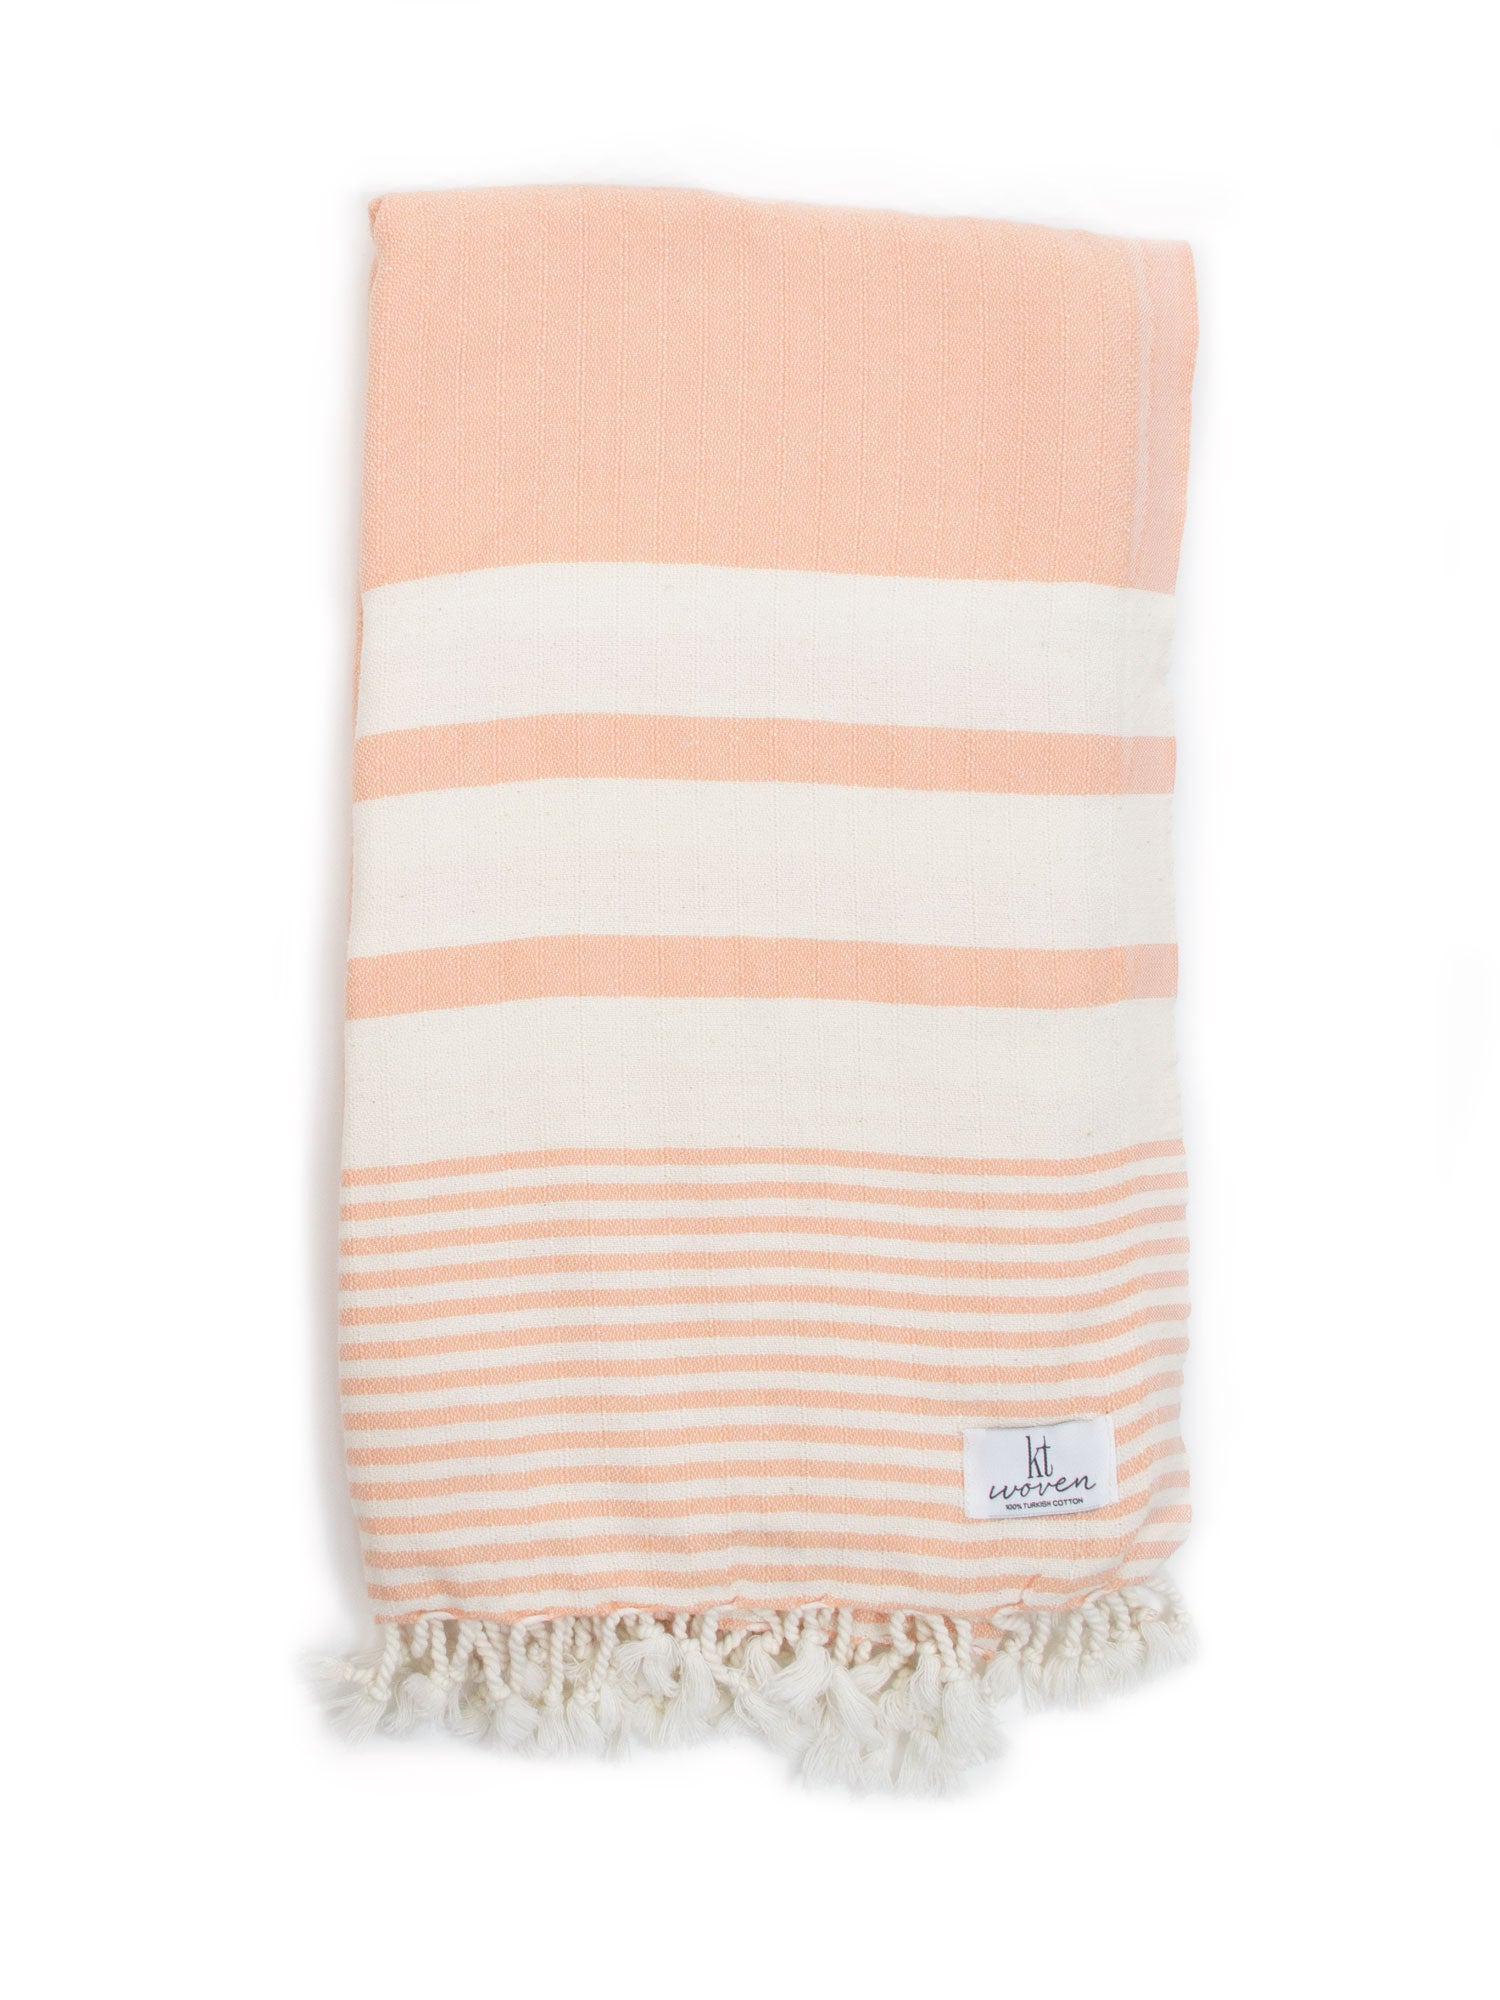 All the Stripes Towel